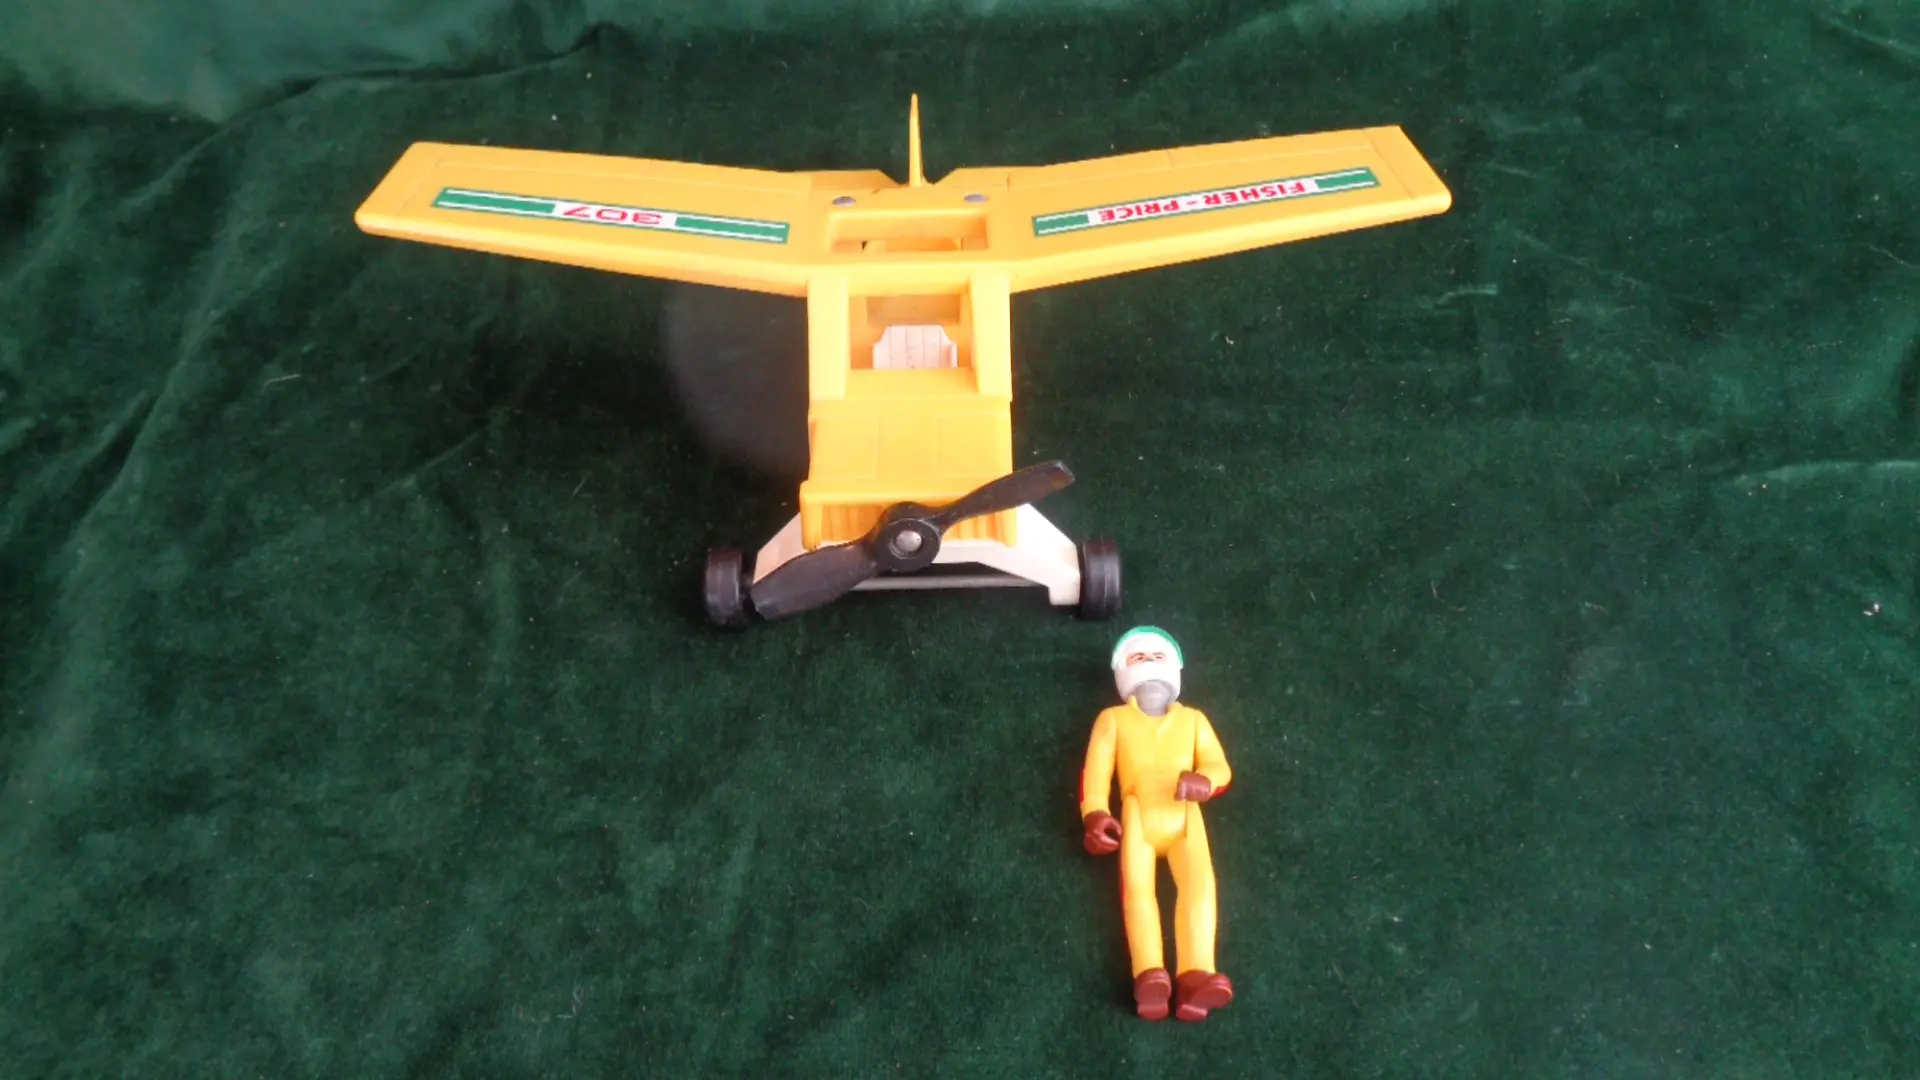 Vintage 307 Fisher-Price Ranger toy plane with pilot